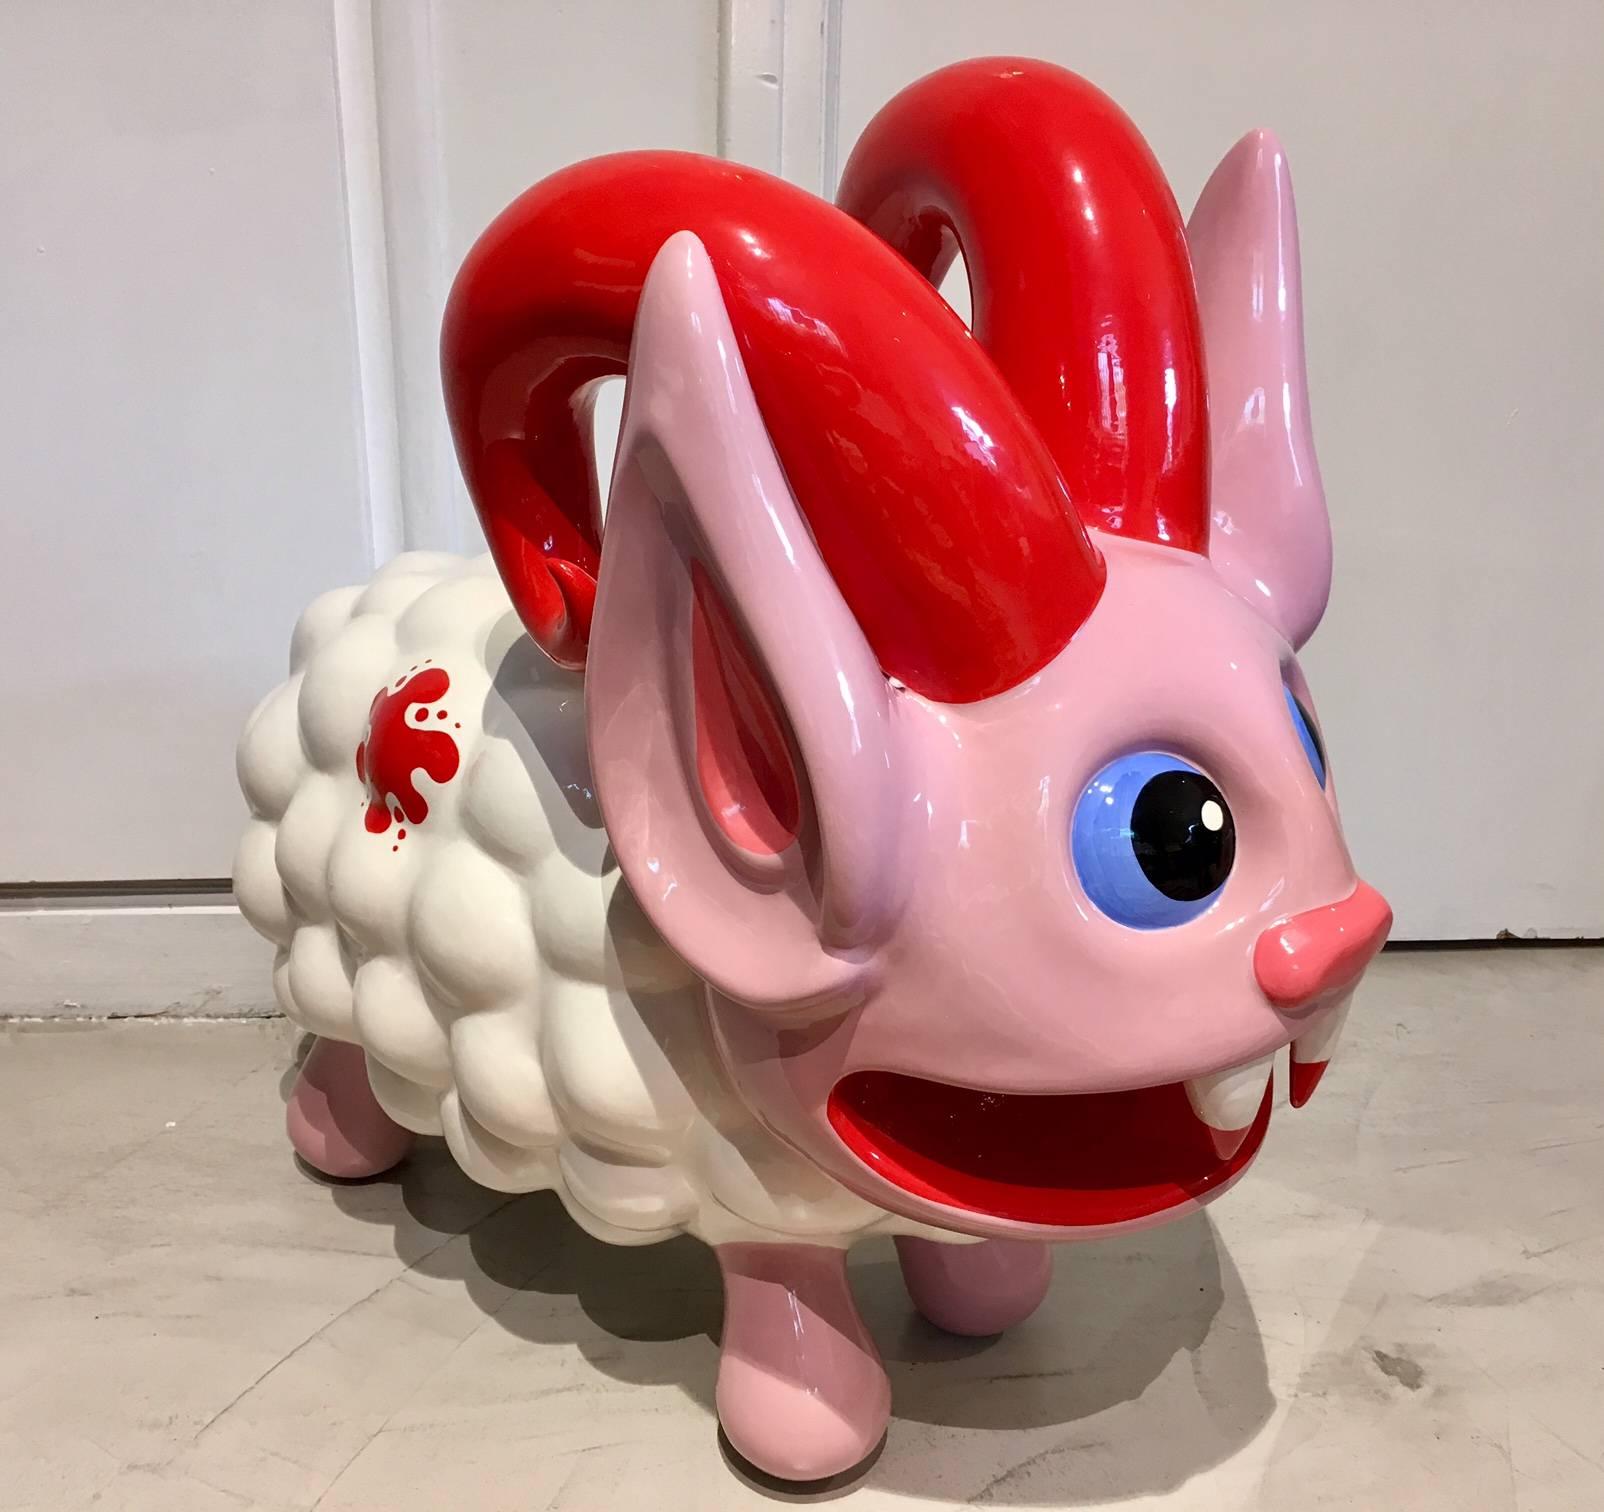 A limited edition earthenware sculpture representing a mutant sheep, half-ram half-vampire designed by Massimo Giacon. Polychrome ceramic from the collection “The pop will eat himself”. Produced by Superego, Italy. Artist's and producer's stamps